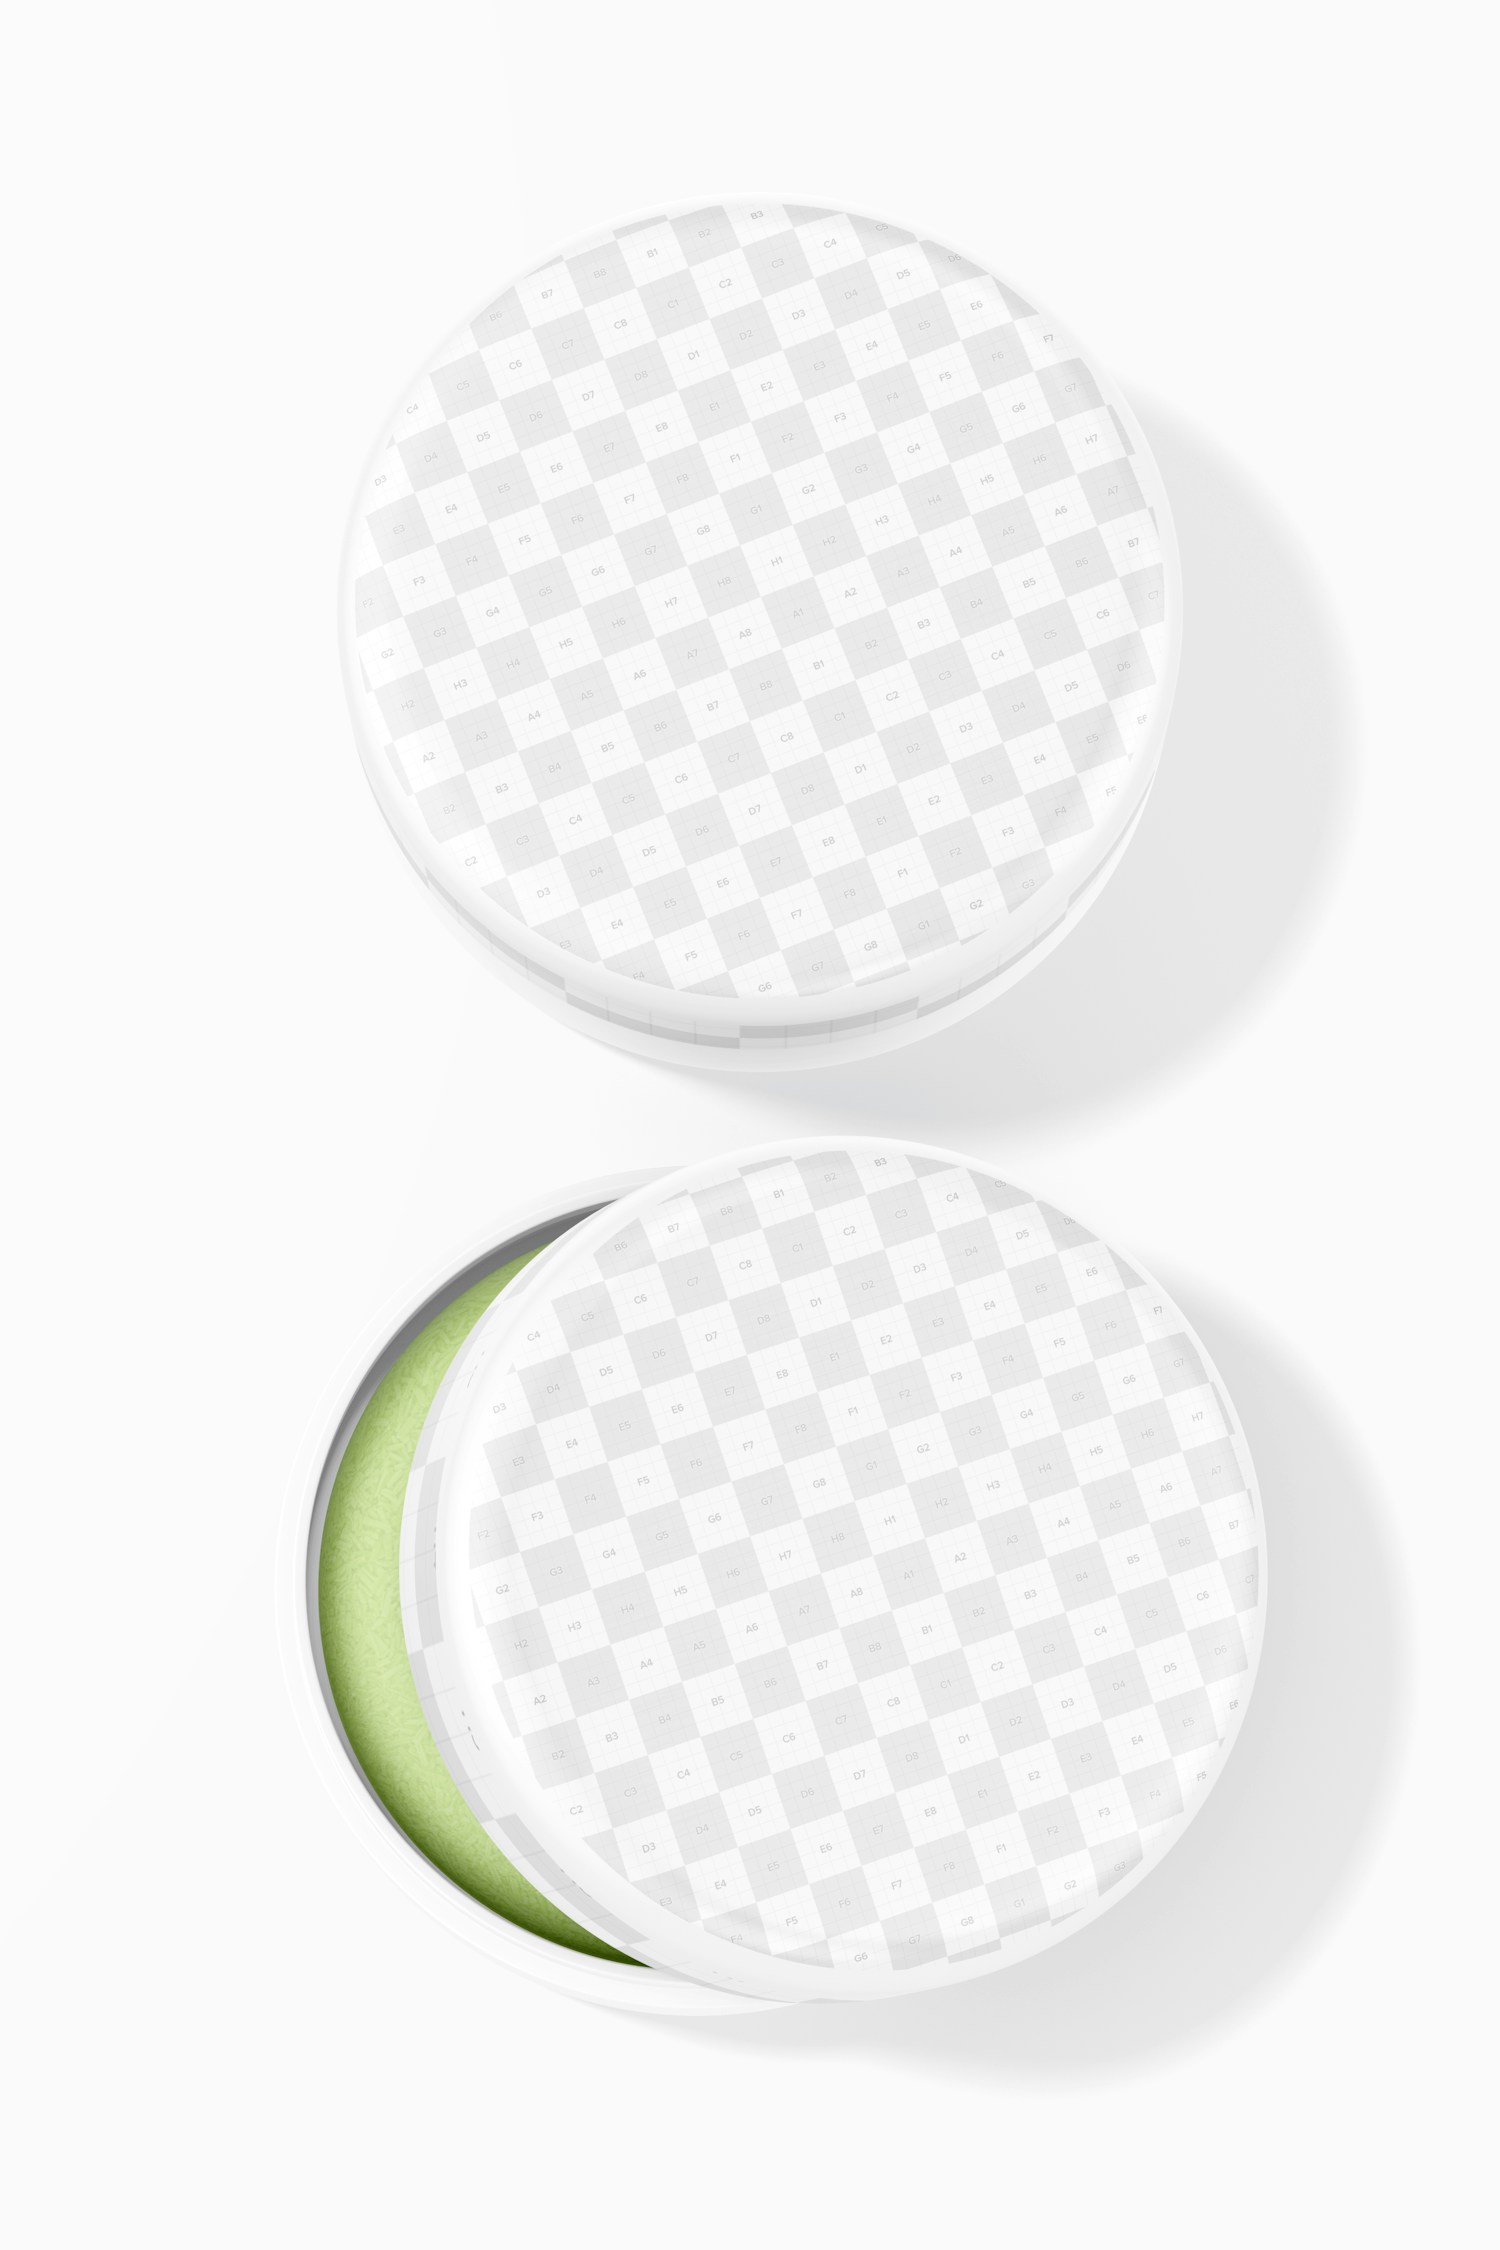 Round Soap Tin Boxes Mockup, Top View